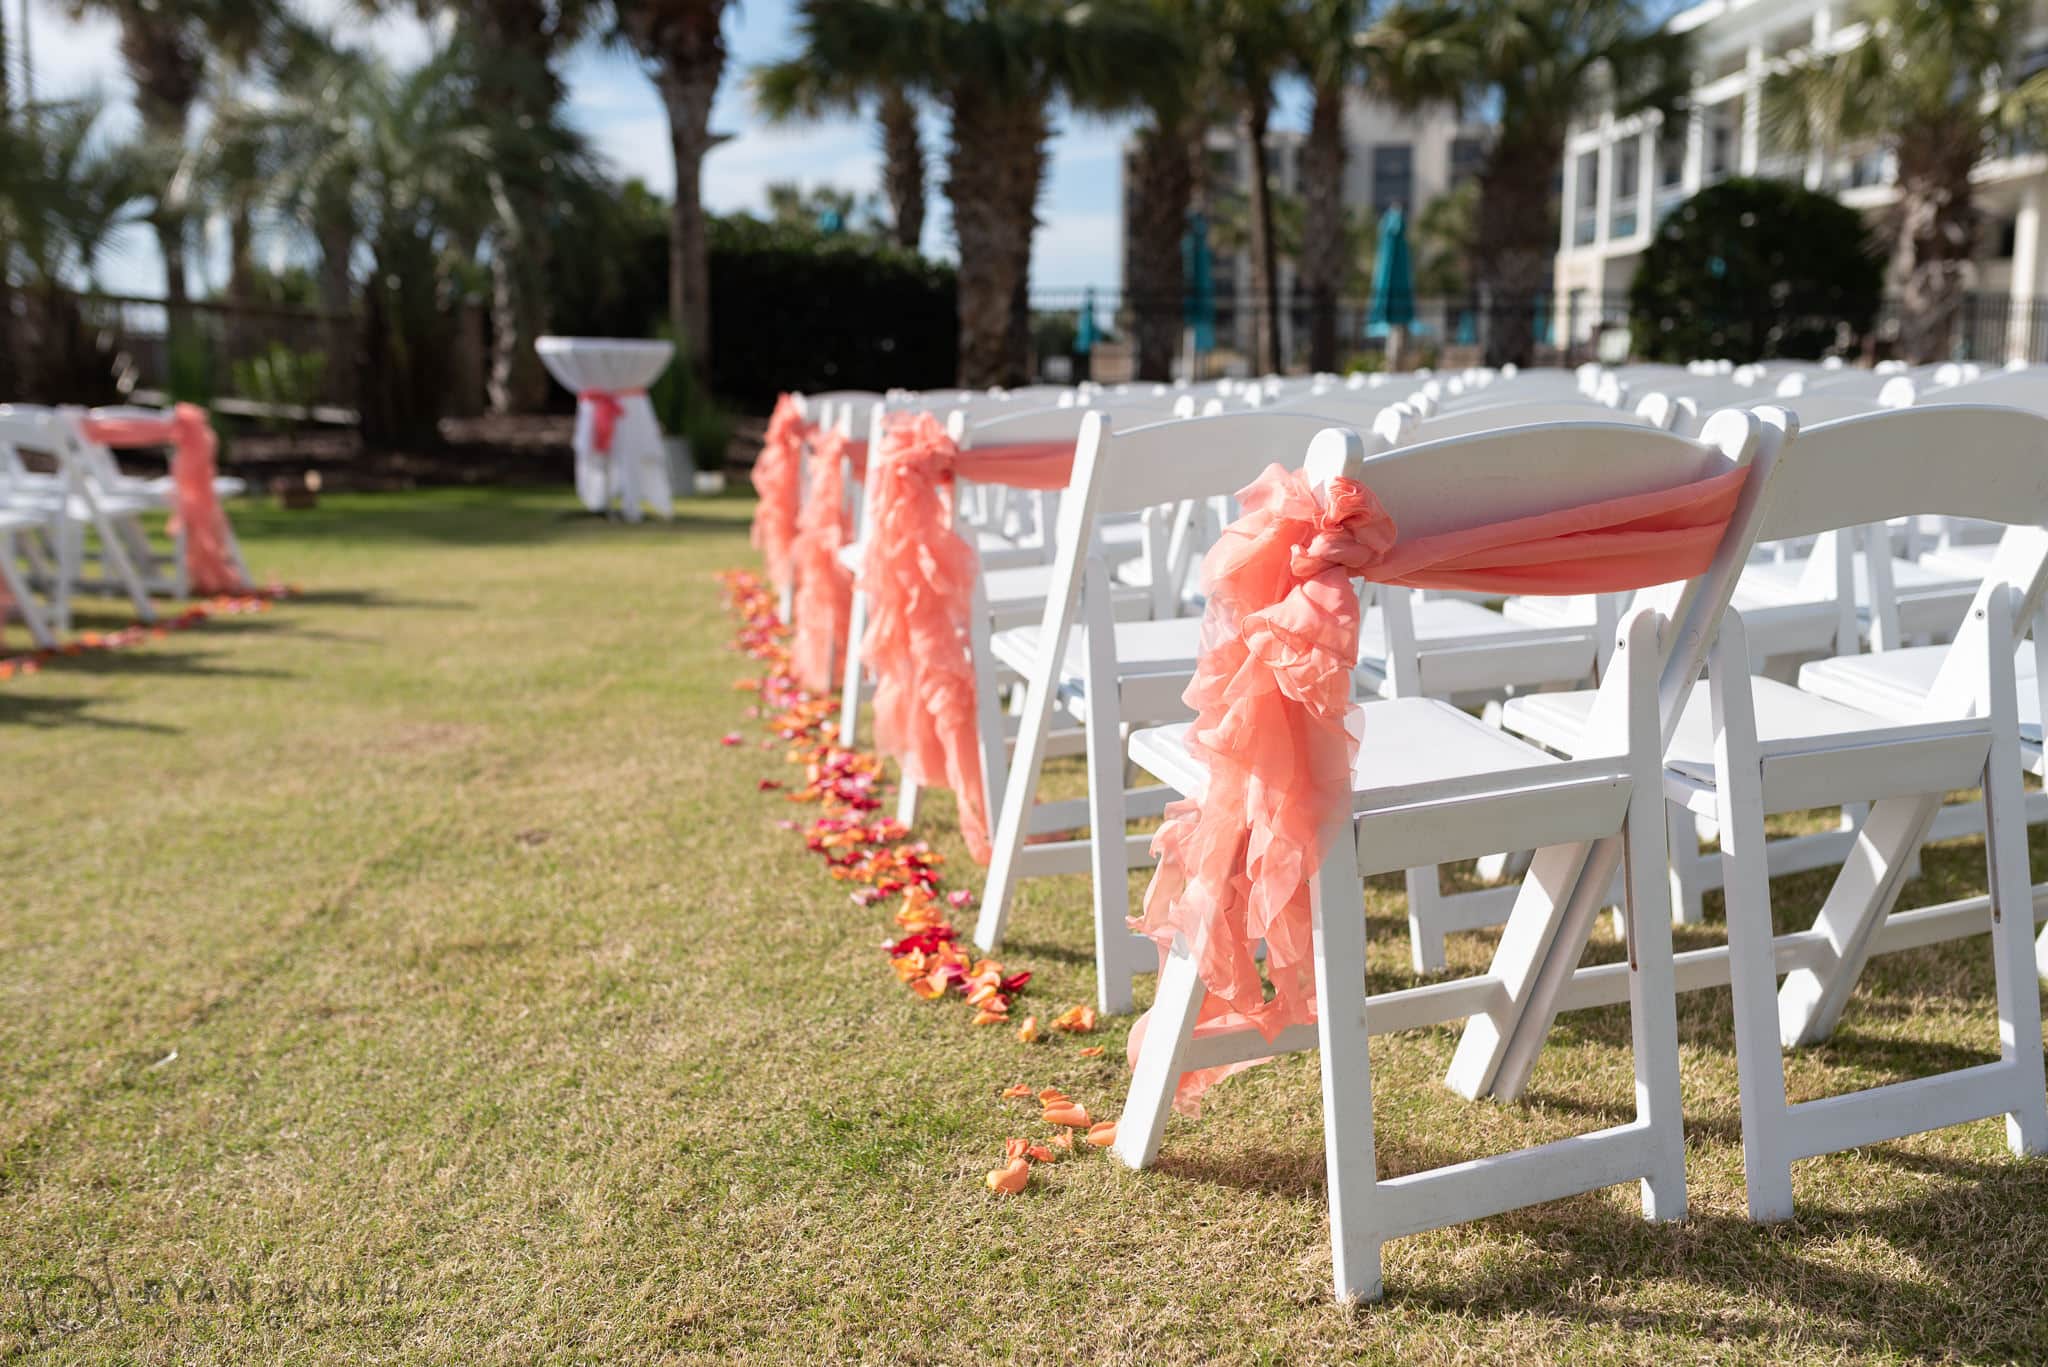 Ribbon decorations on the chairs - Doubletree Resort - Myrtle Beach